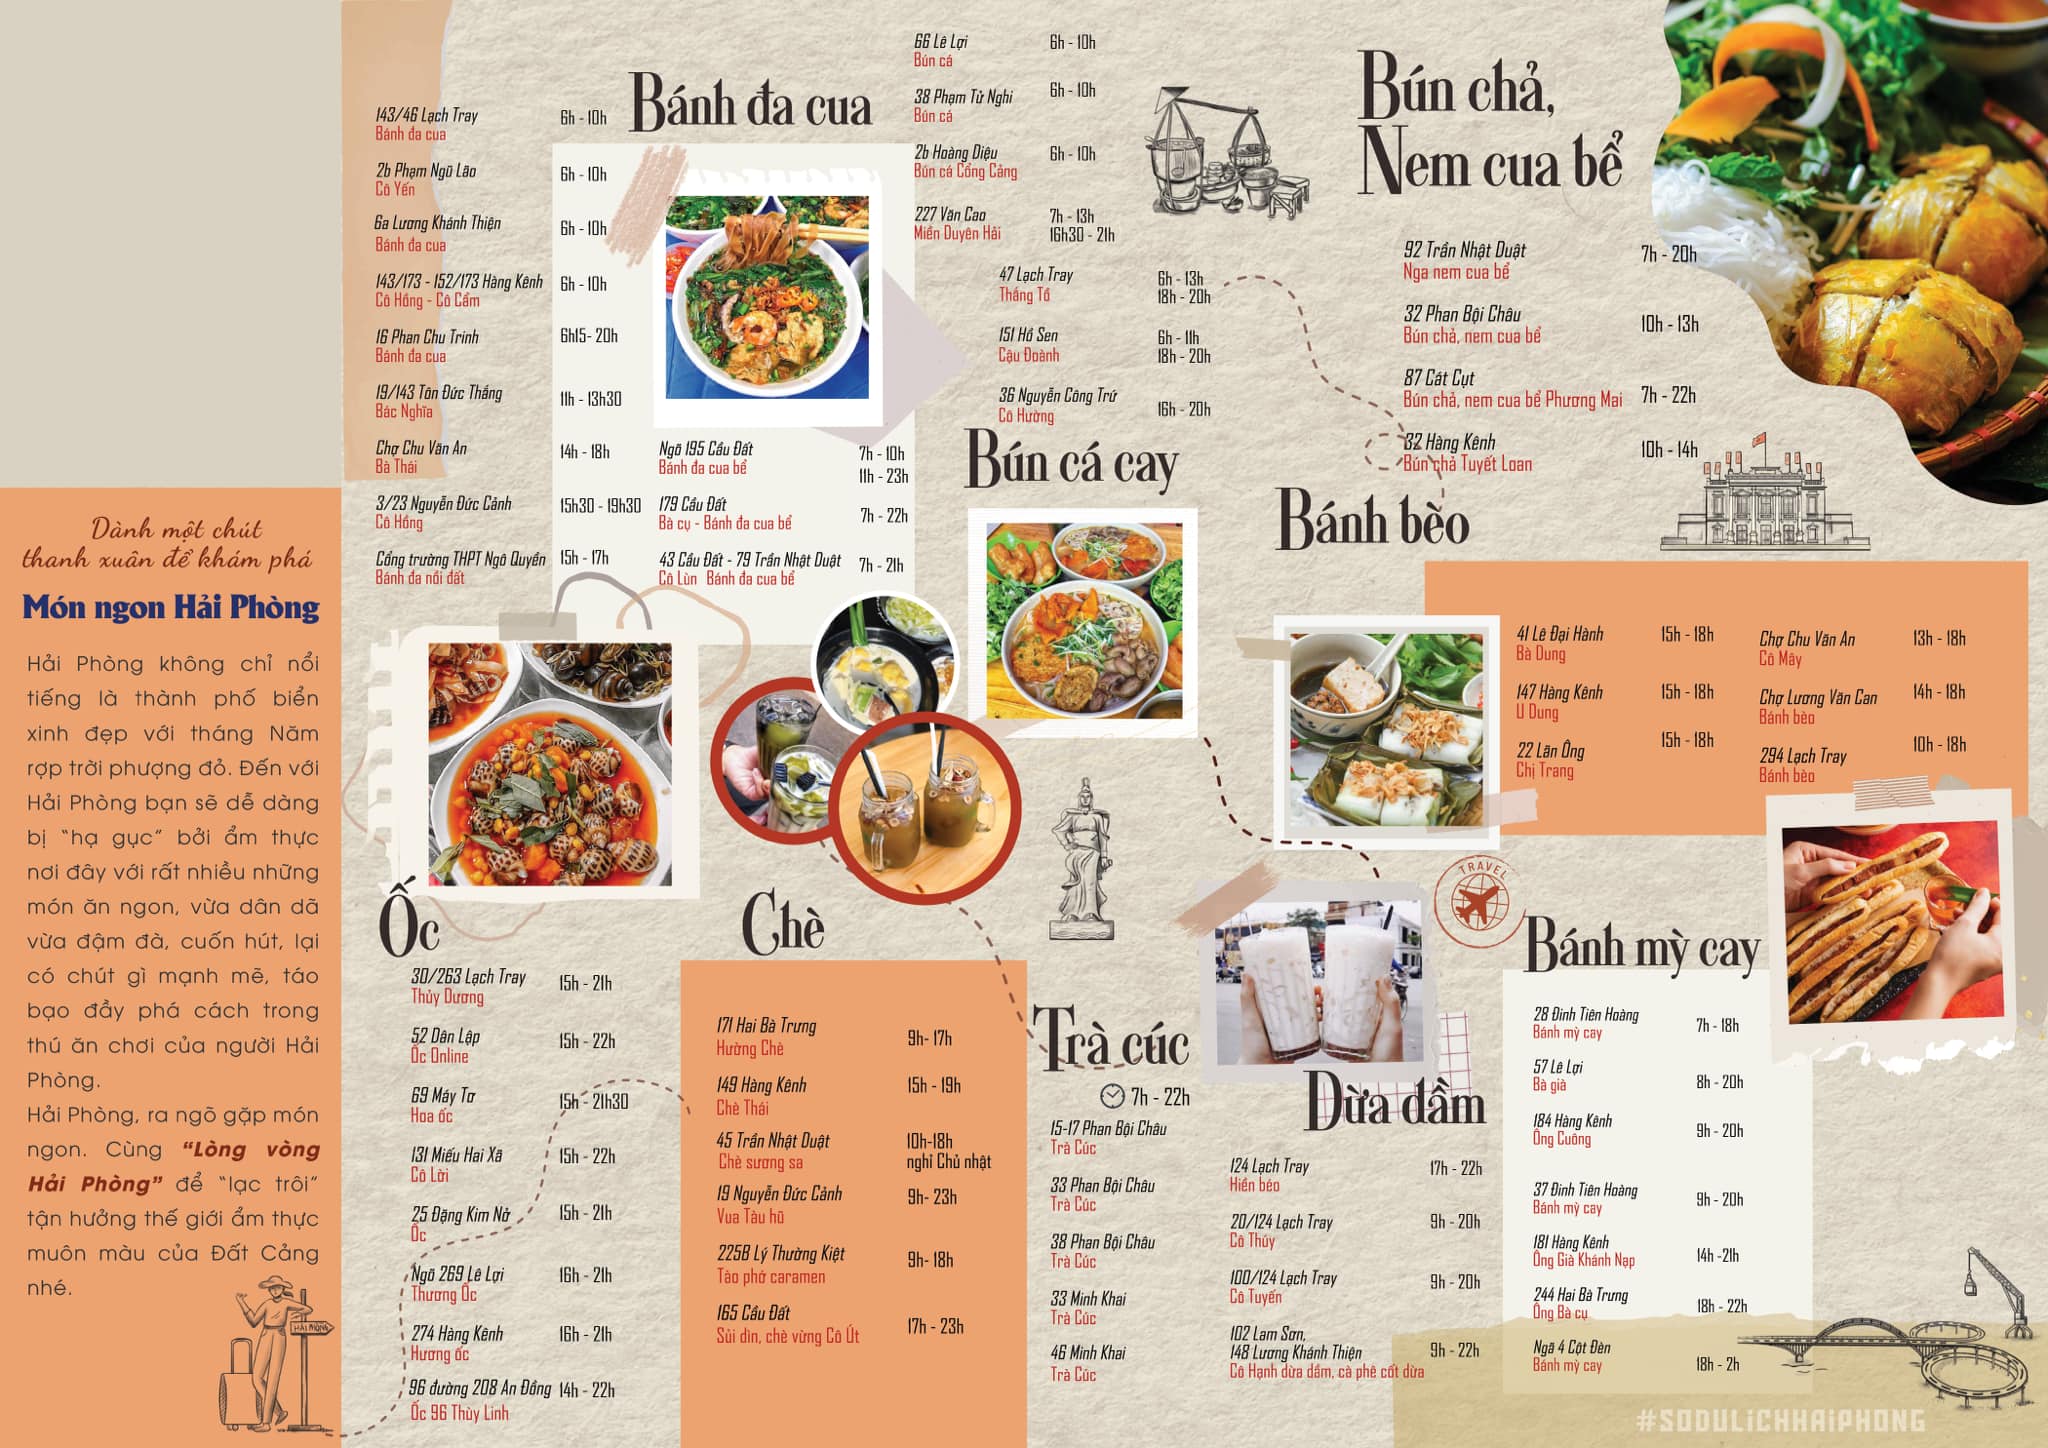 This supplied photo shows a map of Hai Phong delicacies designed by Hai Phong Department of Tourism.